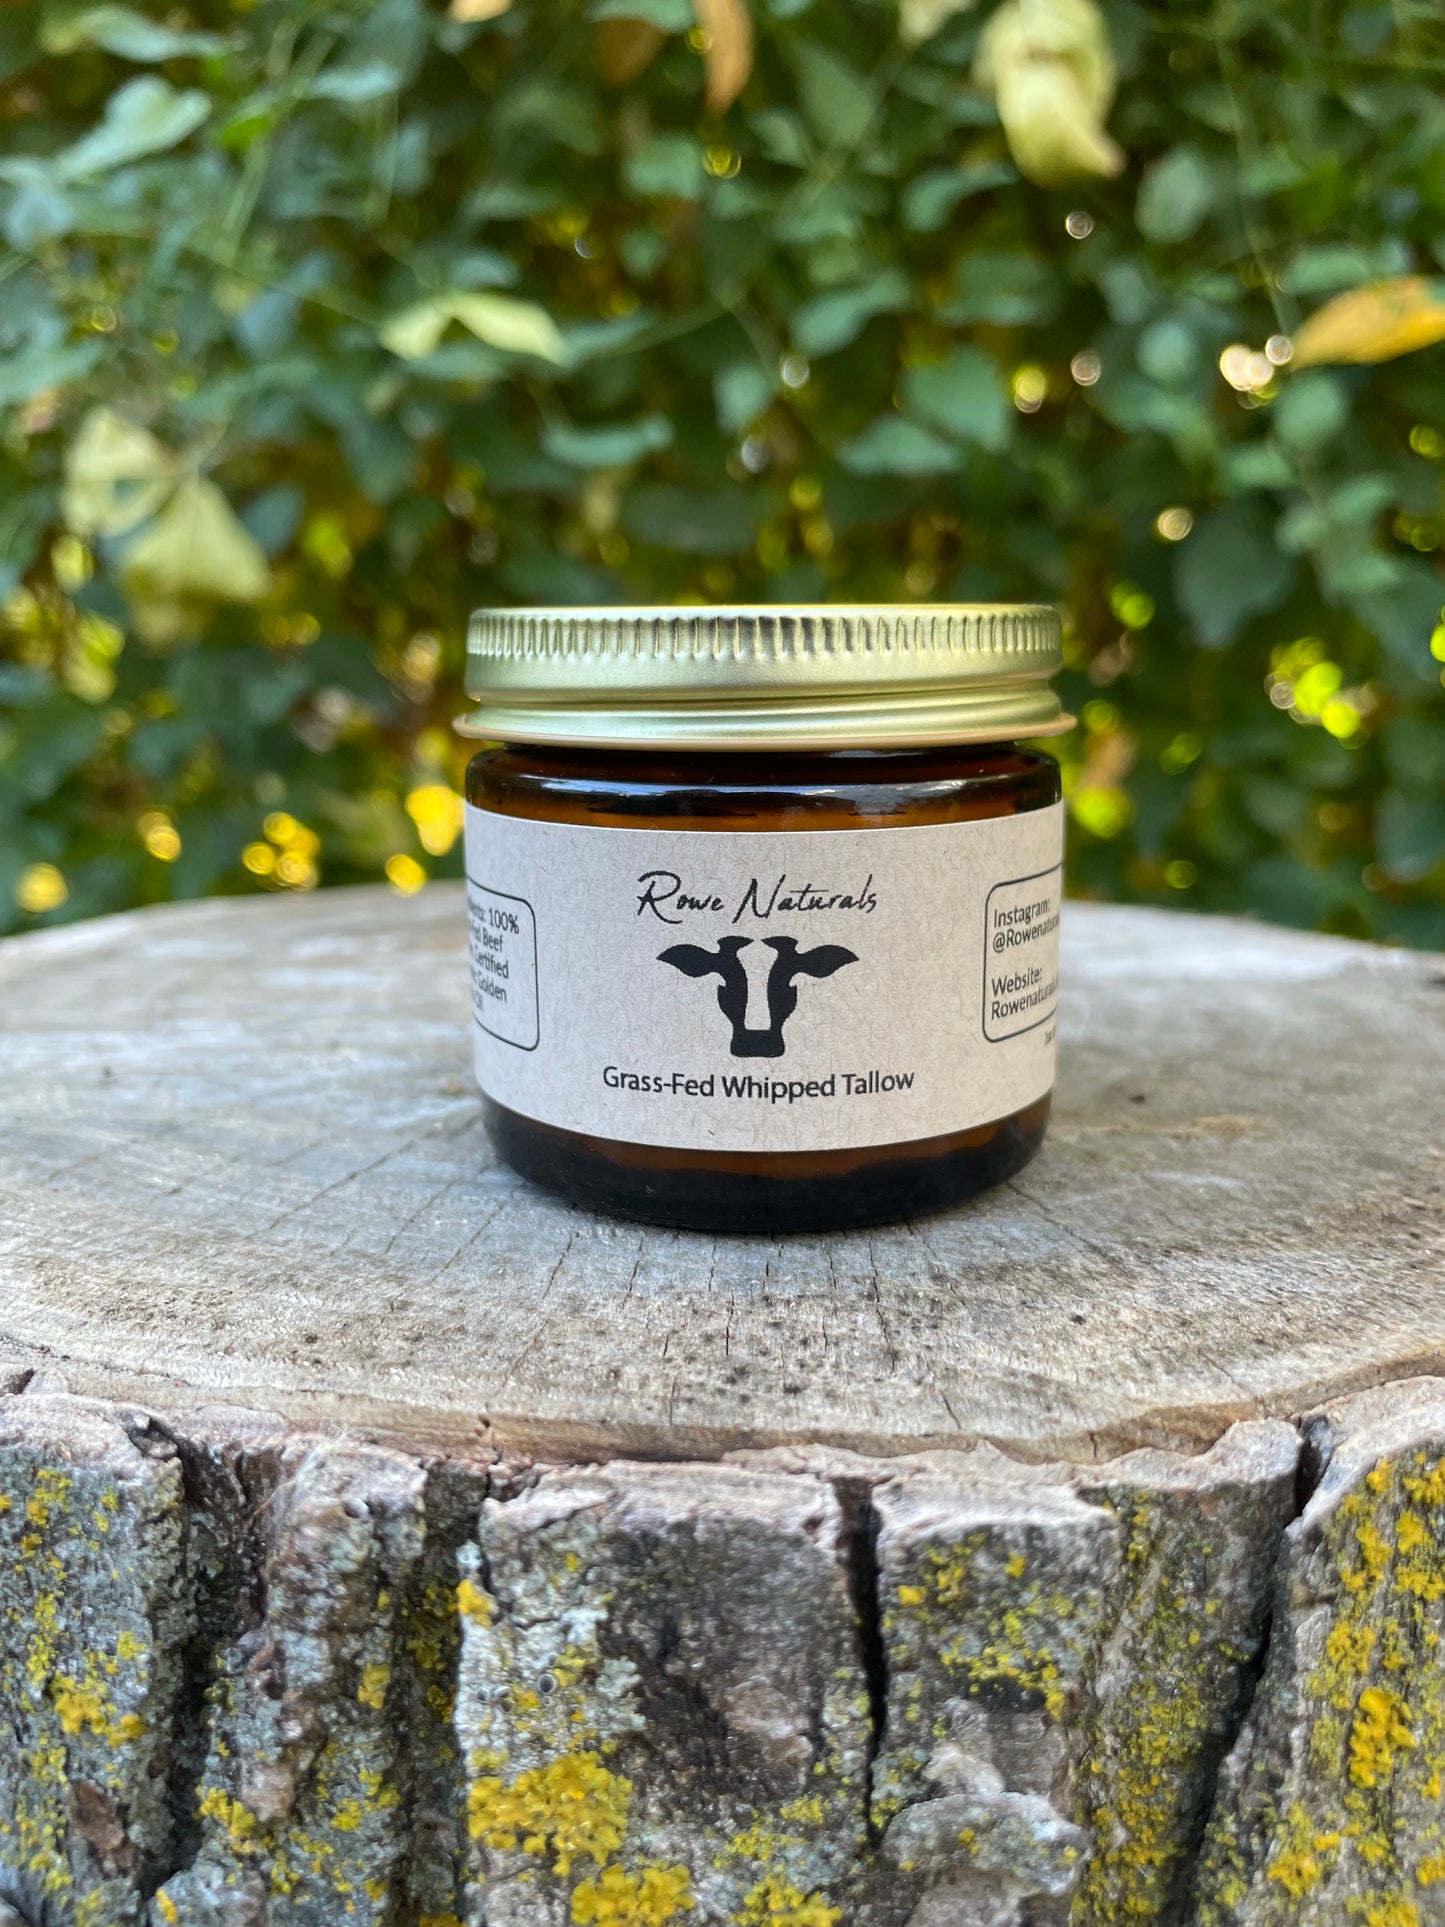 100% Grass-Fed Whipped Tallow